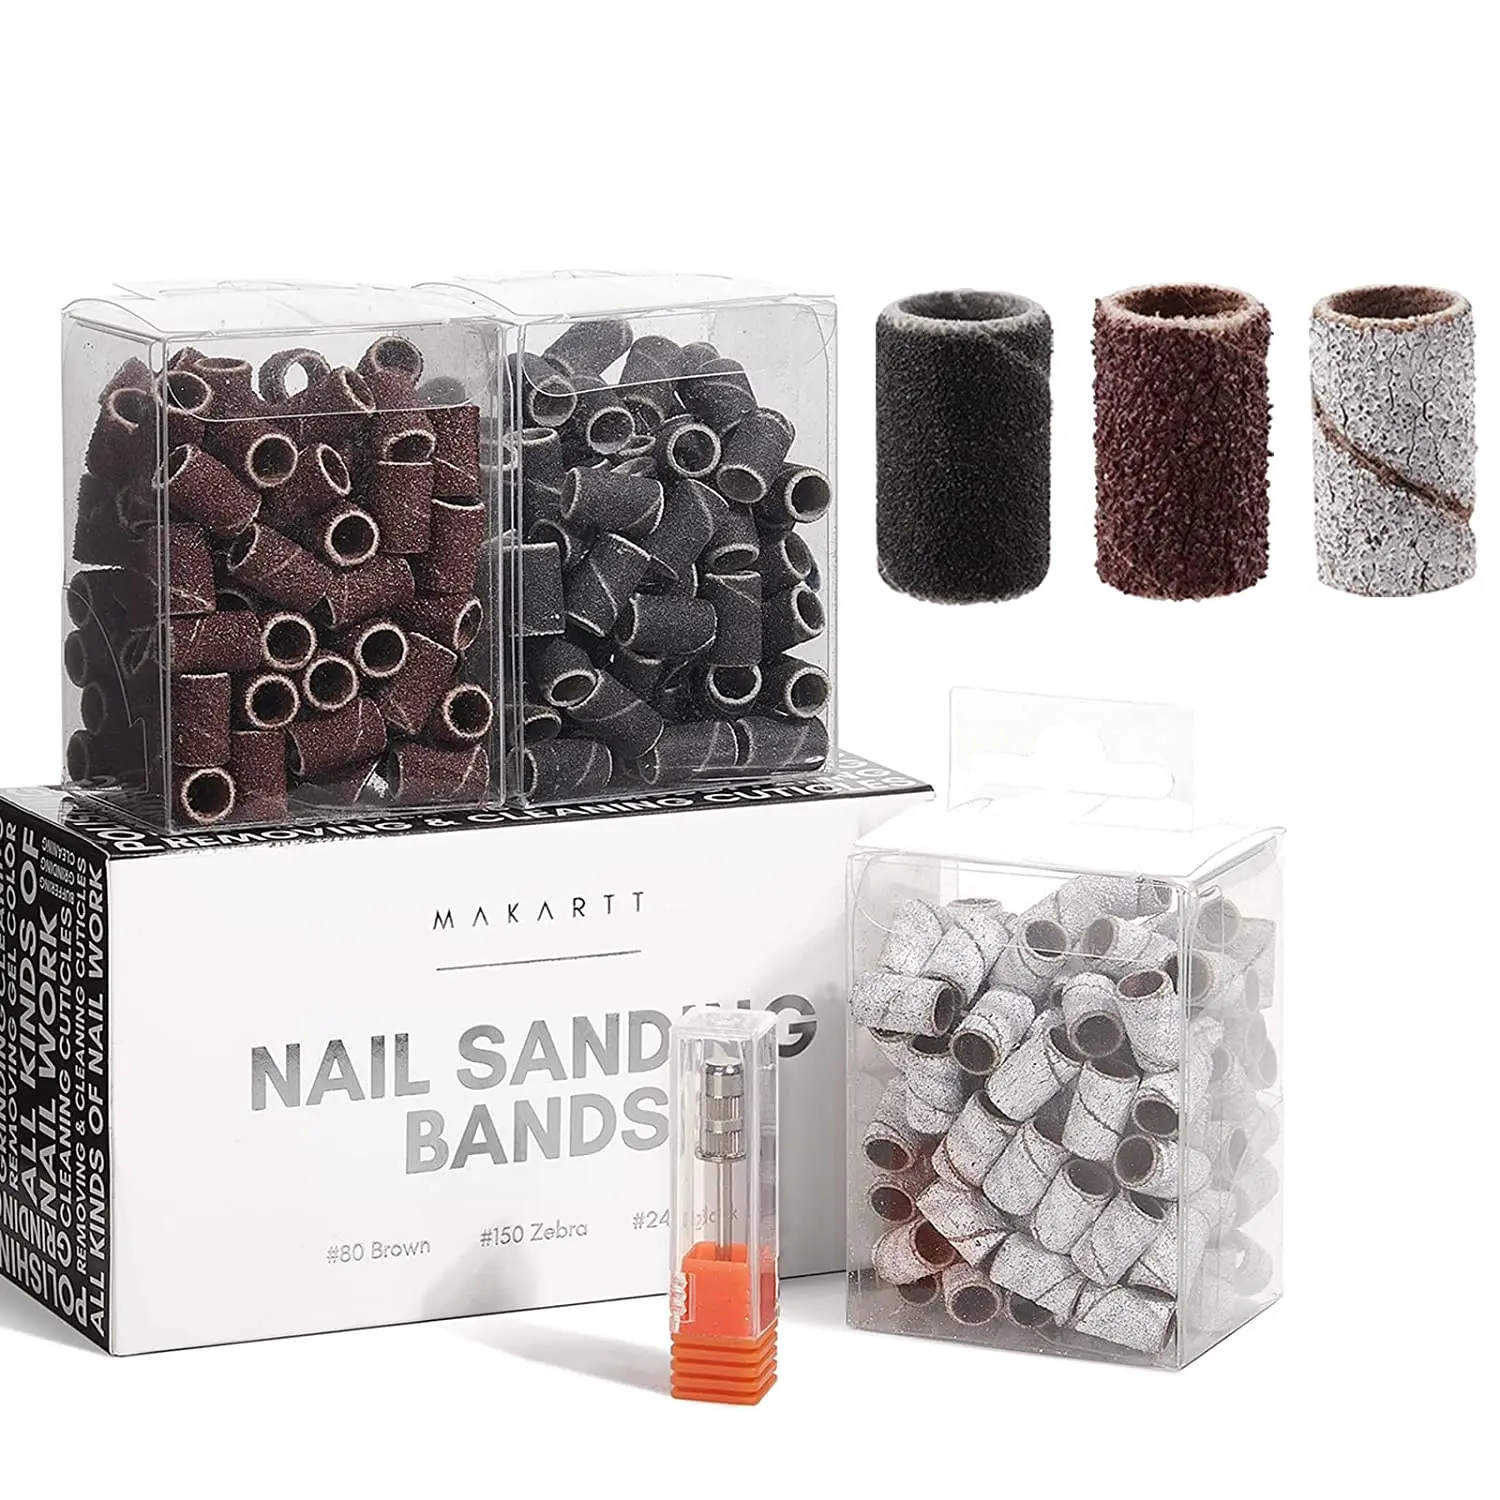 

Sand Band Makartt 300pcs Sanding Bands 80 150 240 Grit For Professional Manicure Pedicure Nail Drill Machine Each Size 100pcs